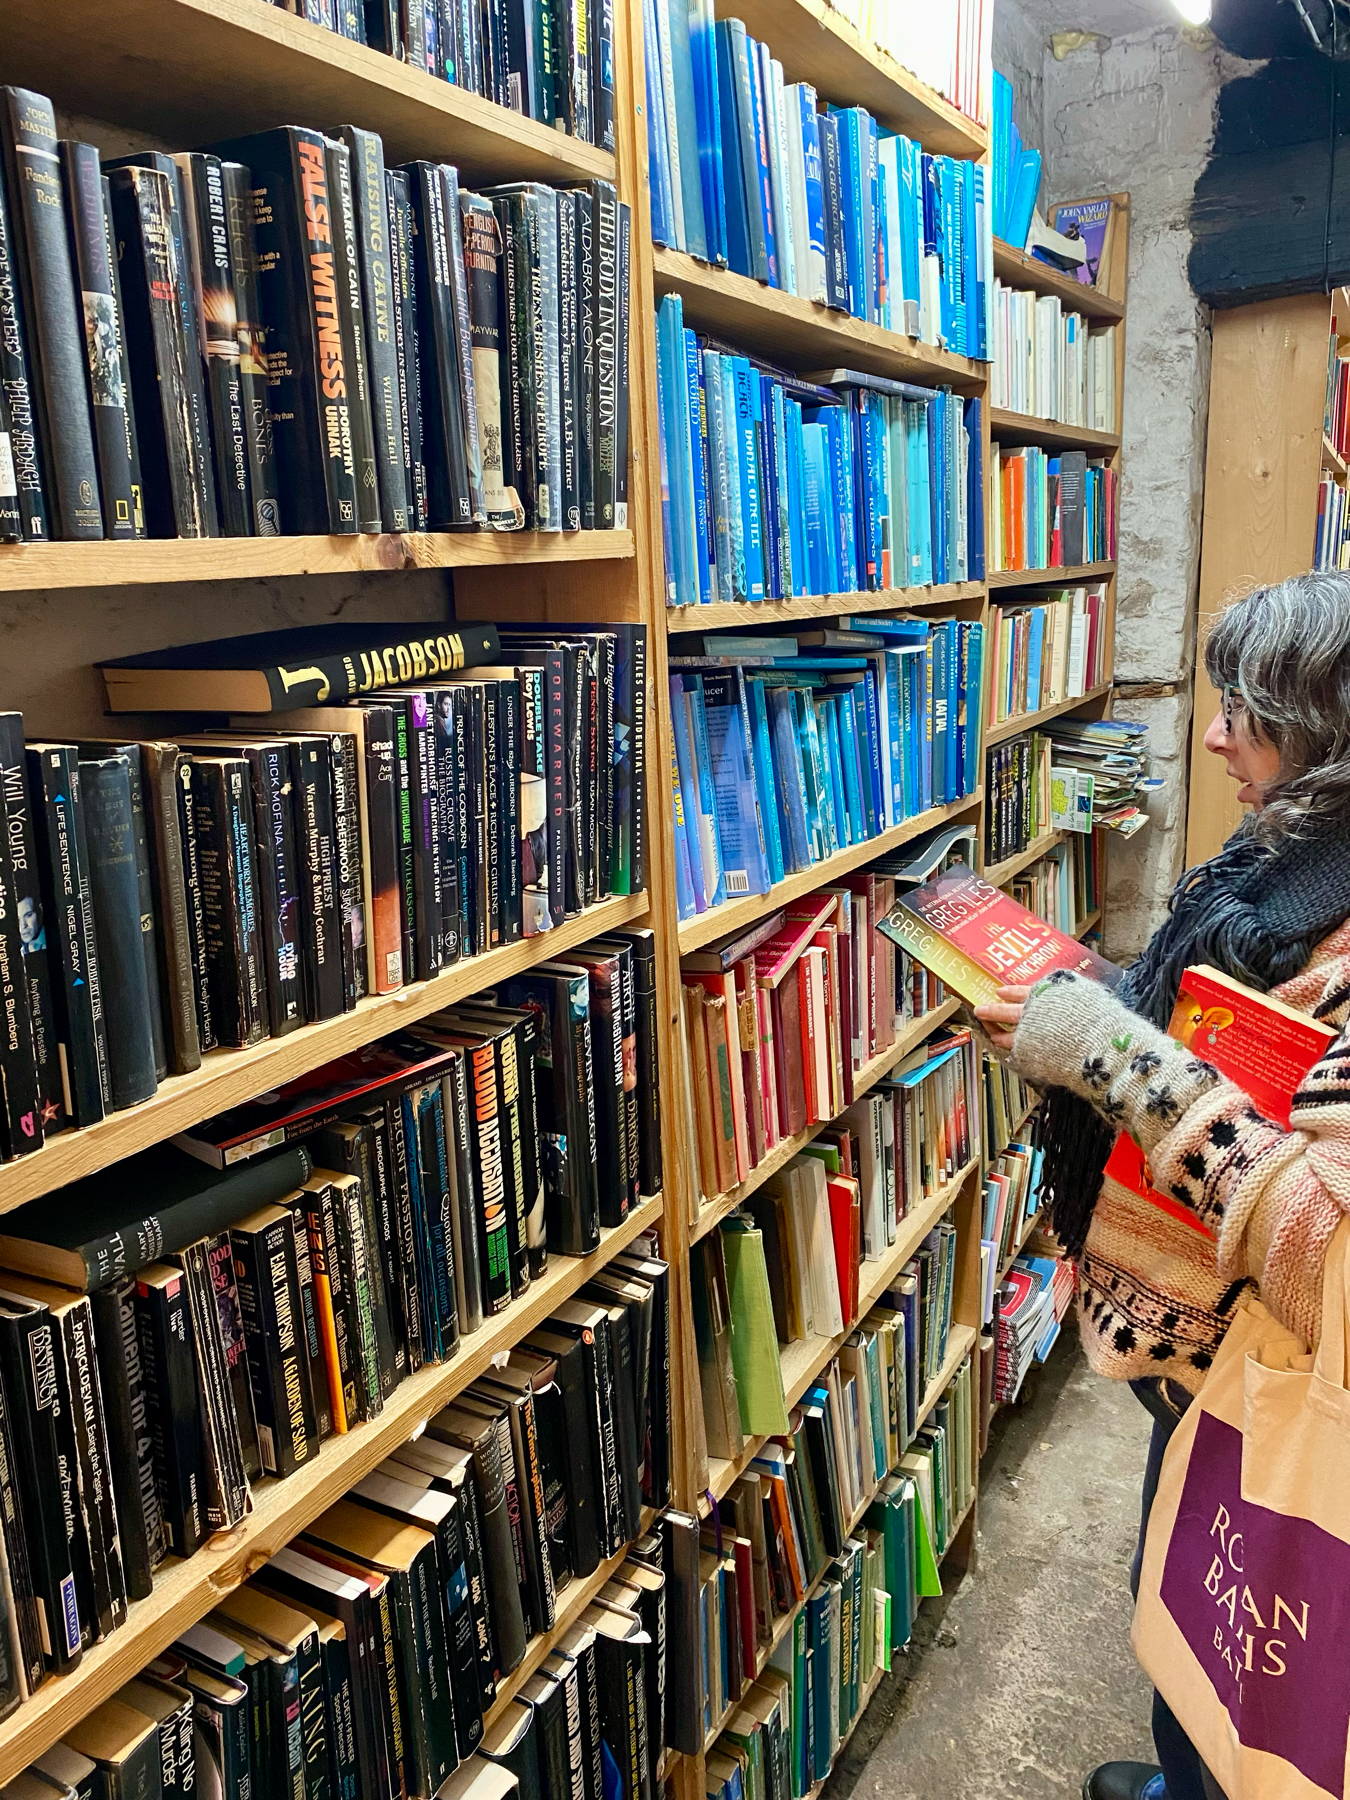 Person browsing books in a cozy bookstore with shelves organized by color.